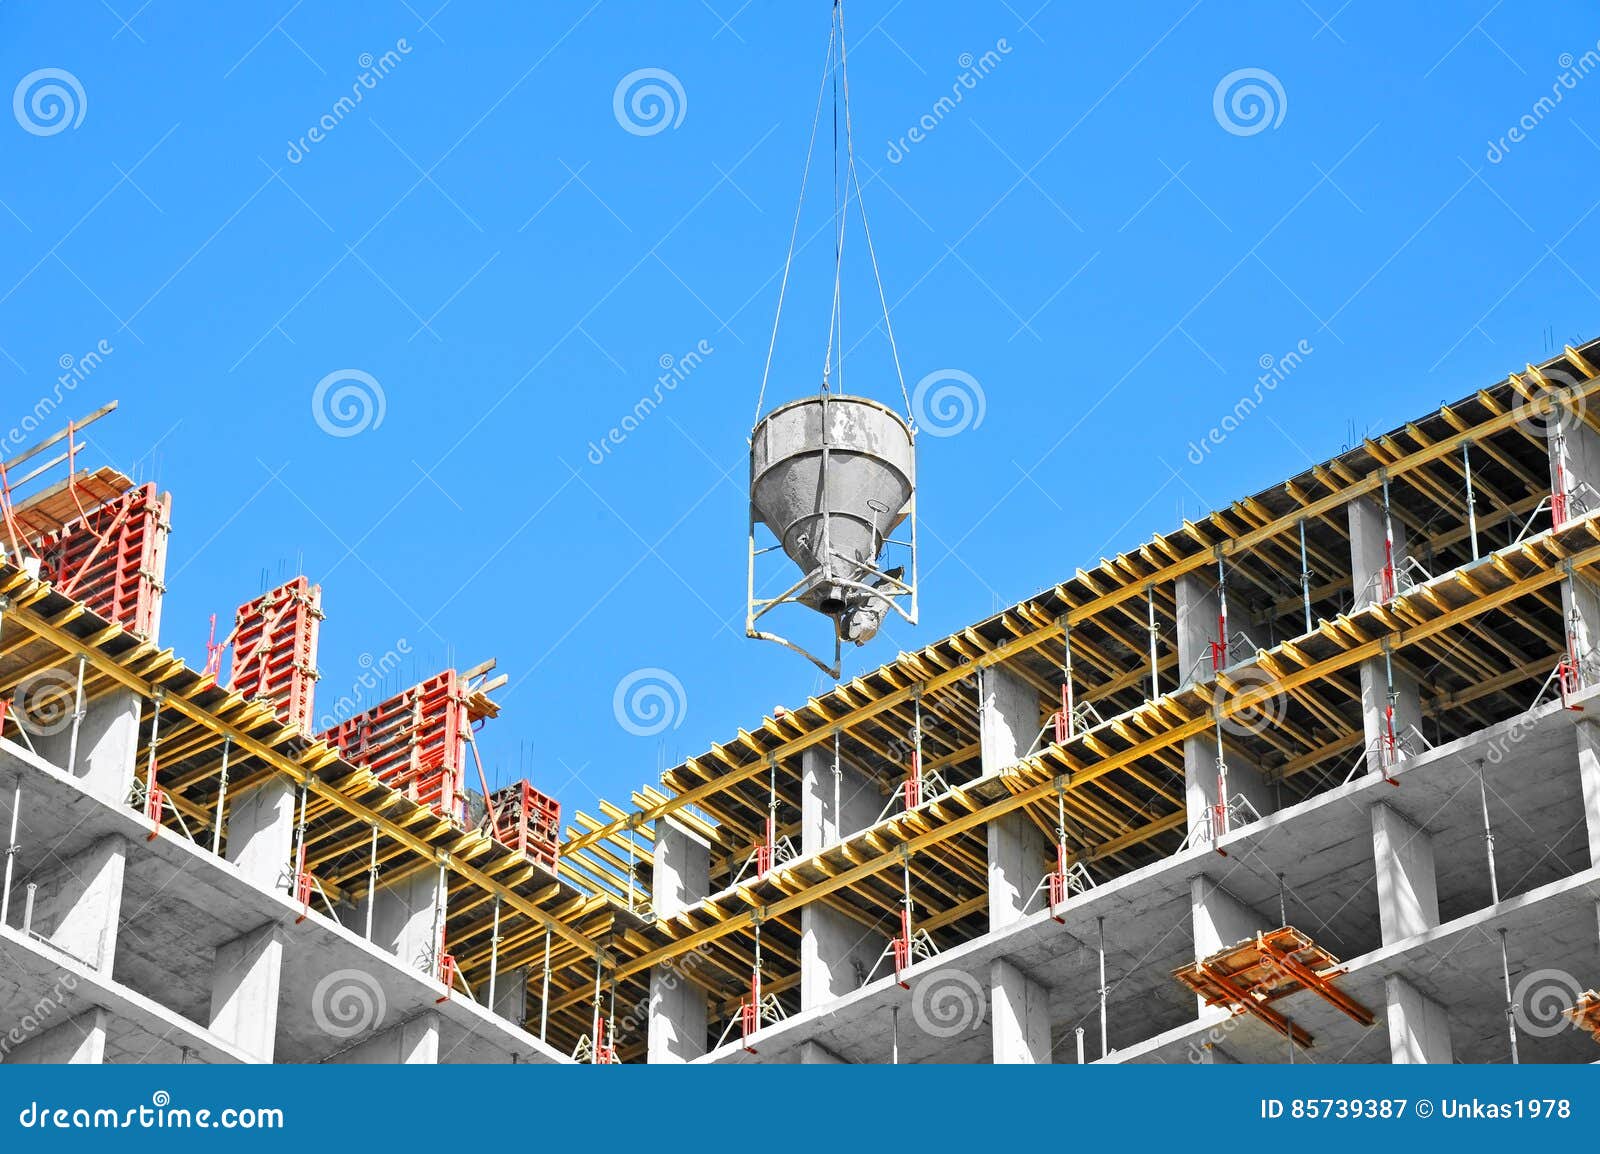 Crane Lifting Cement Mixing Container Stock Image - Image of industry